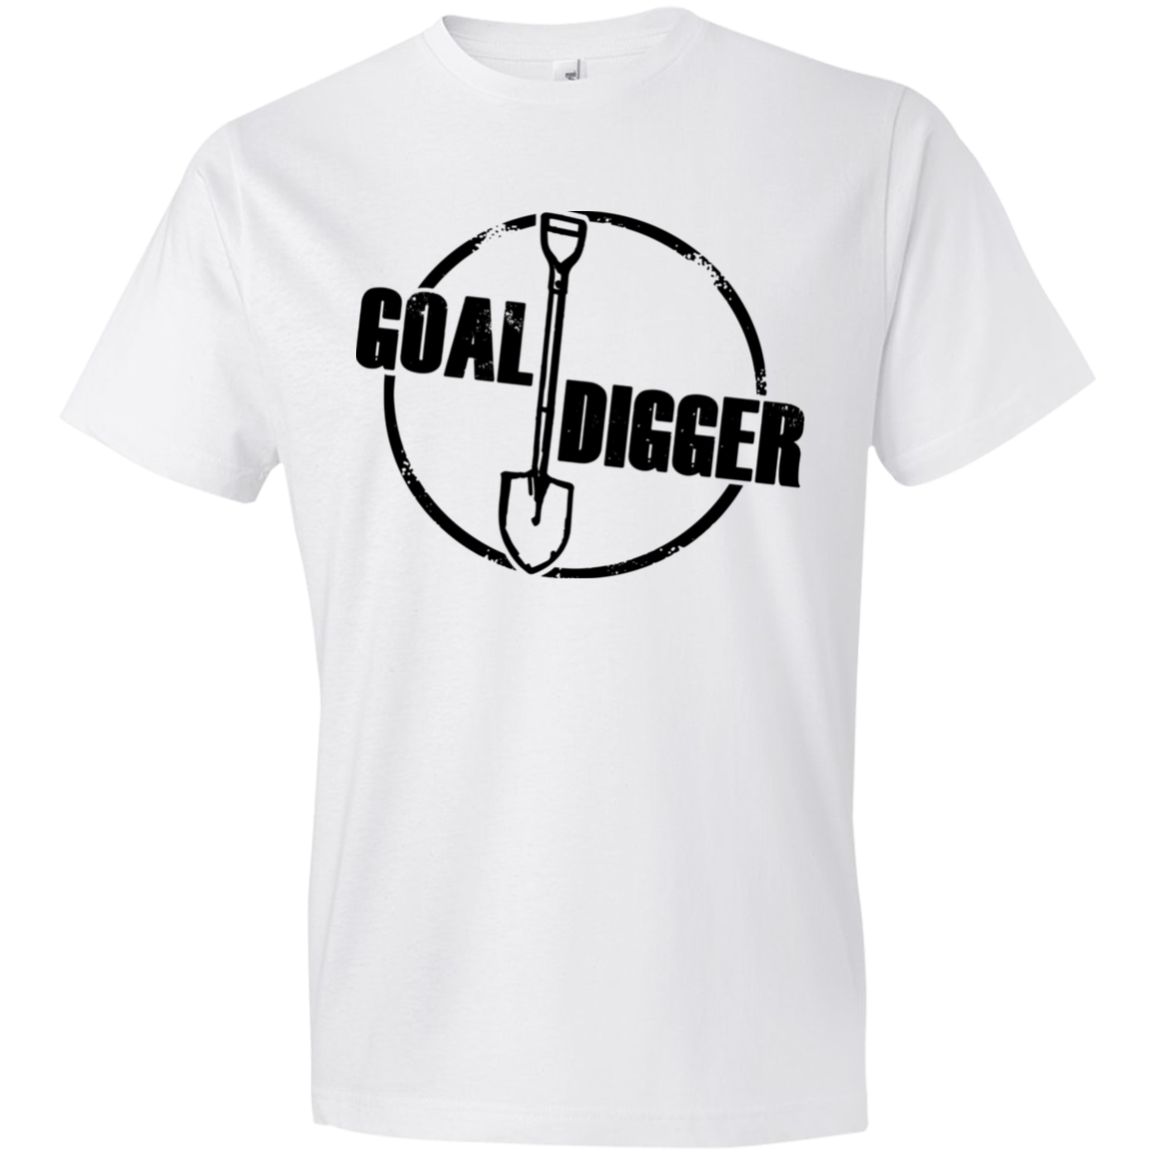 Buy Goal Digger T-shirt My New Goals New Years Goals on a Online in India 